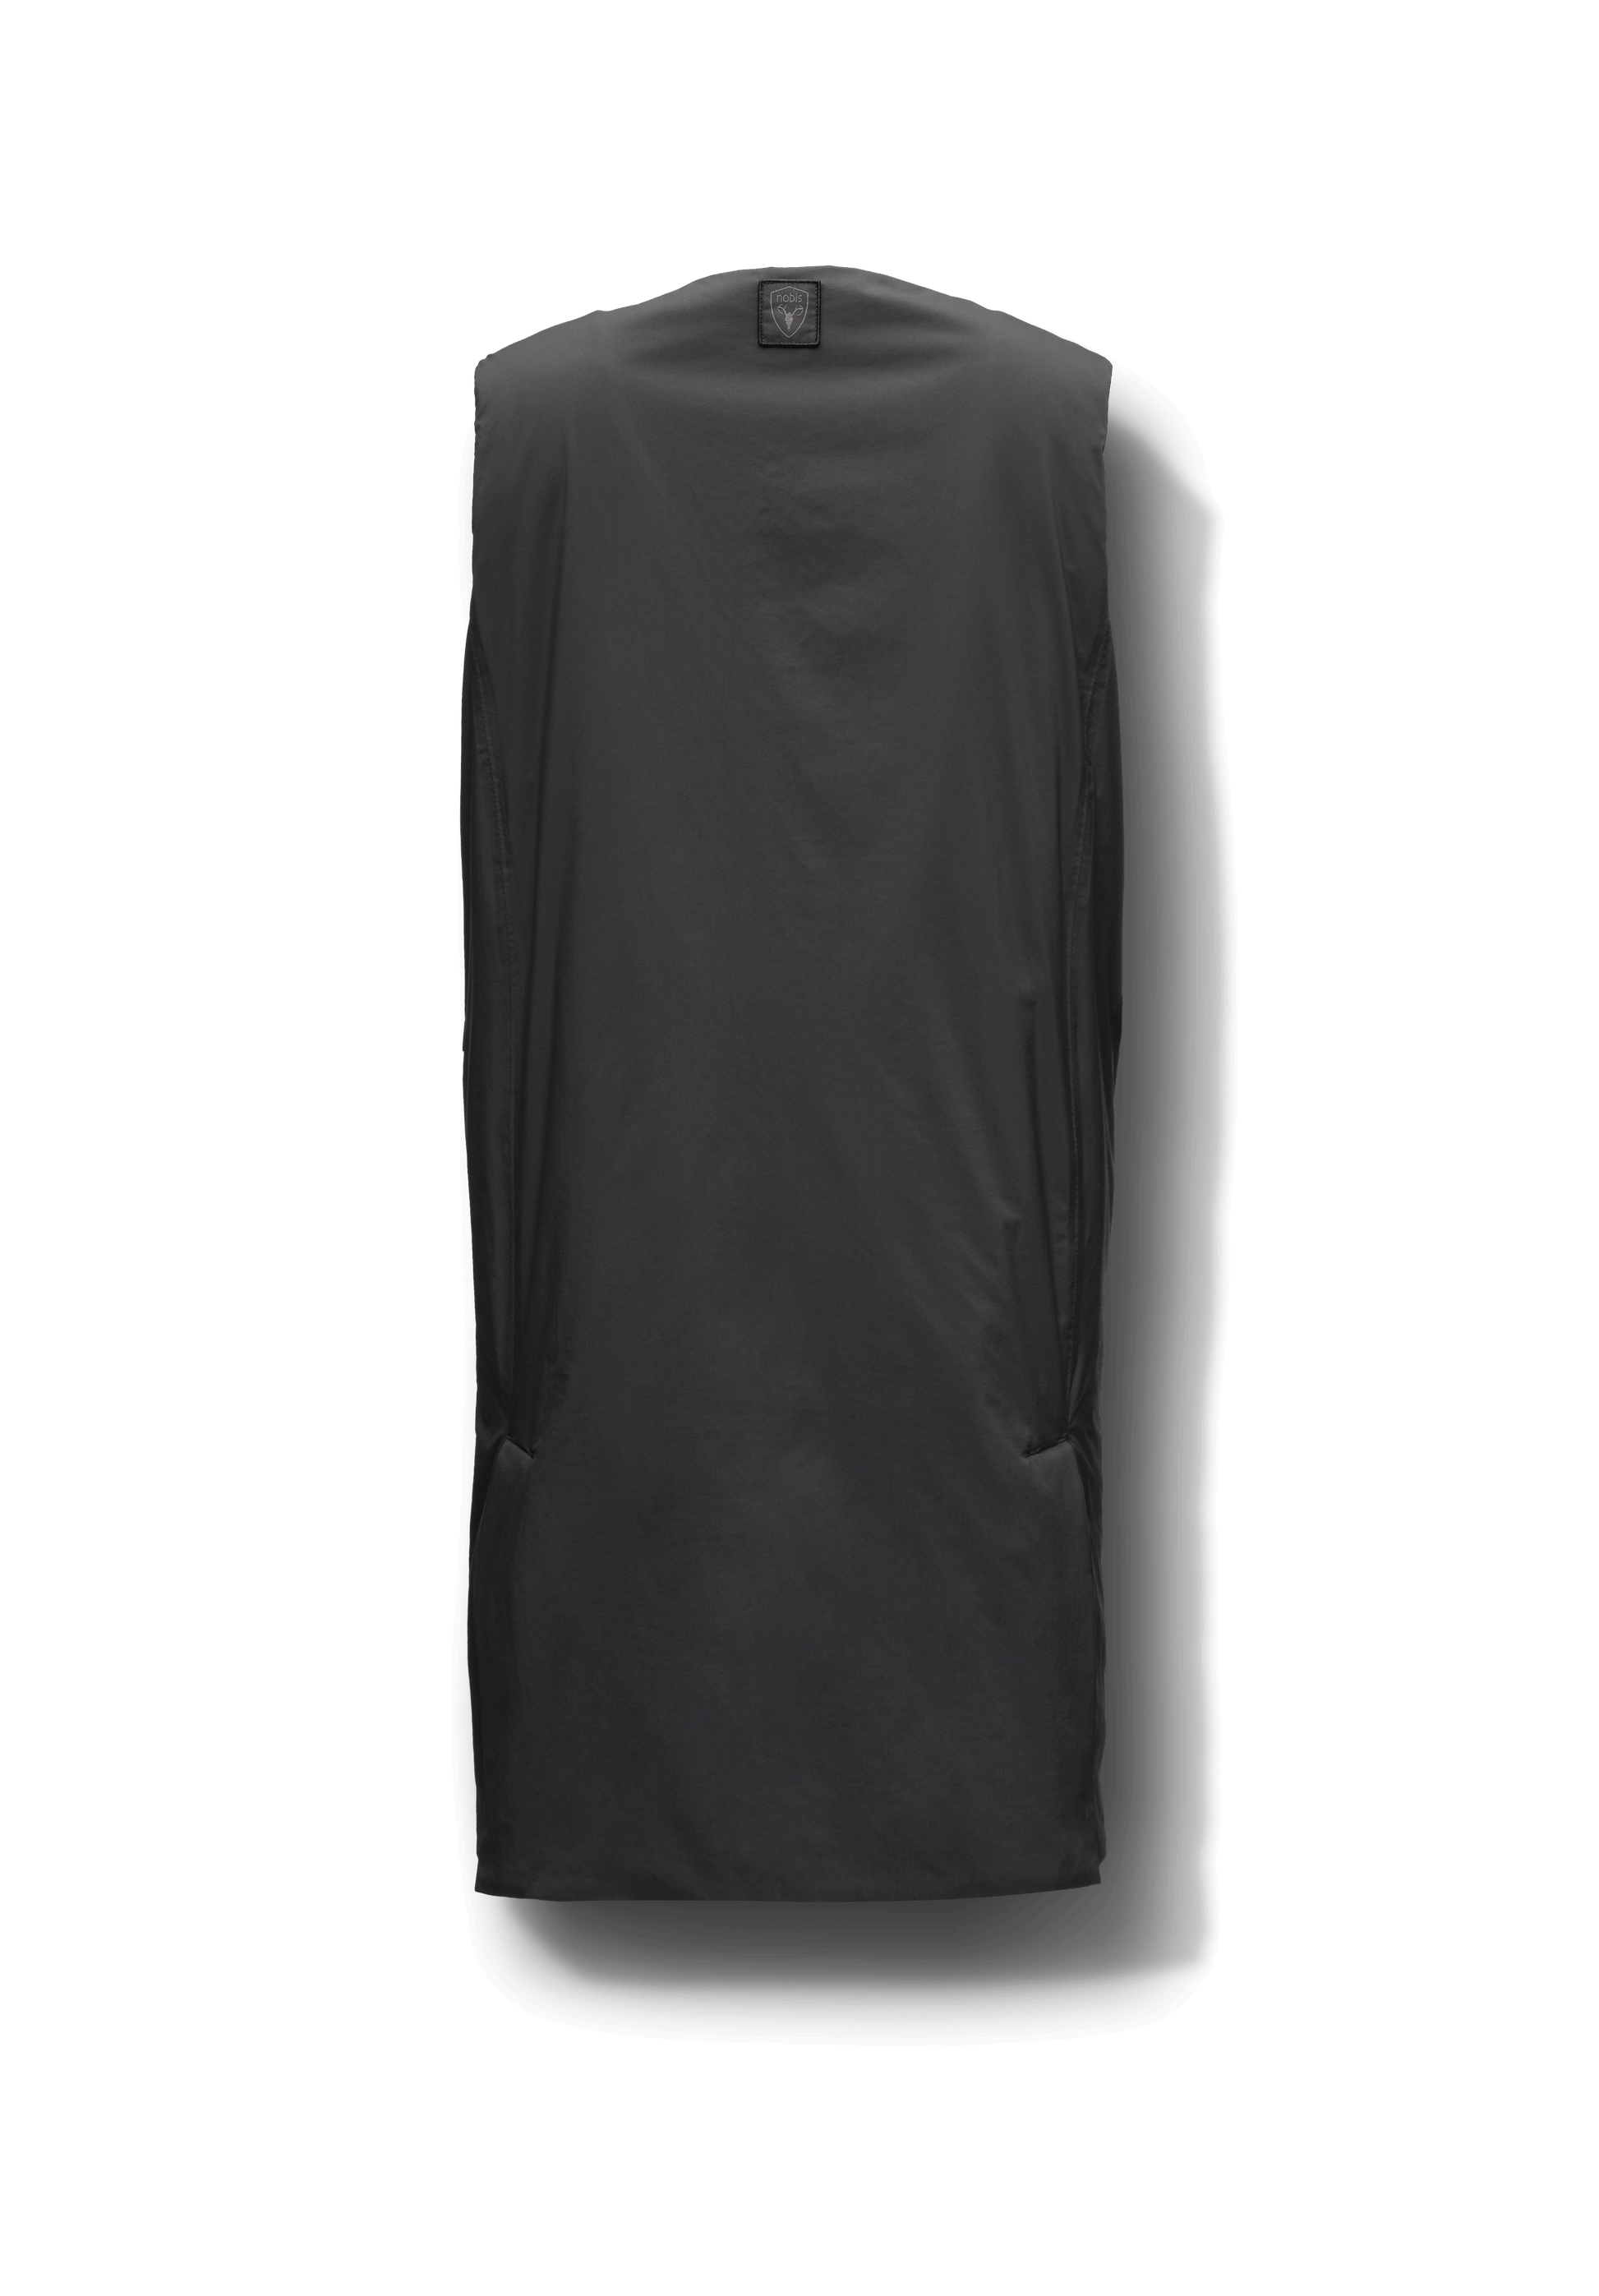 Brexton Women's Tailored Long Mid Layer Vest in knee length, centre front wind flap, flap closure waist pocket with additional side entry storage, single vent on back bottom hem, in Black